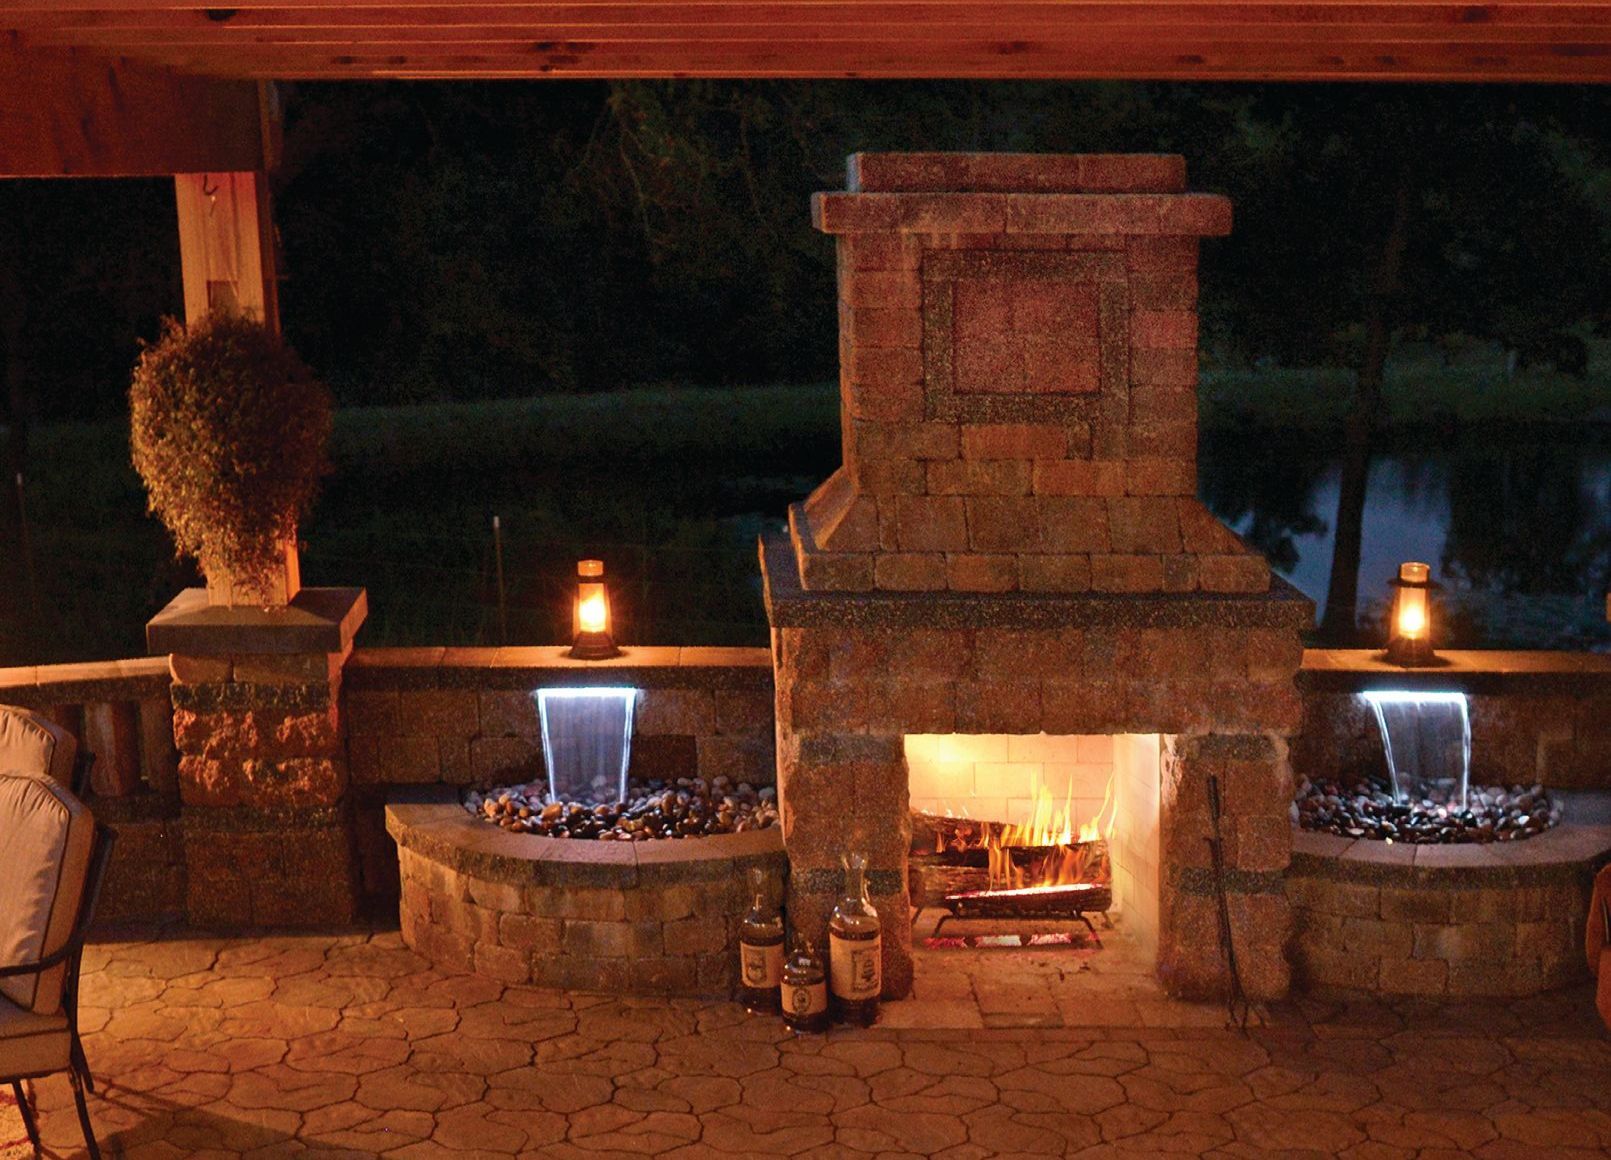 Stockman Stoneworks Is Your Source for Castello Flagstone Pavers in Our Landscaping Selection.